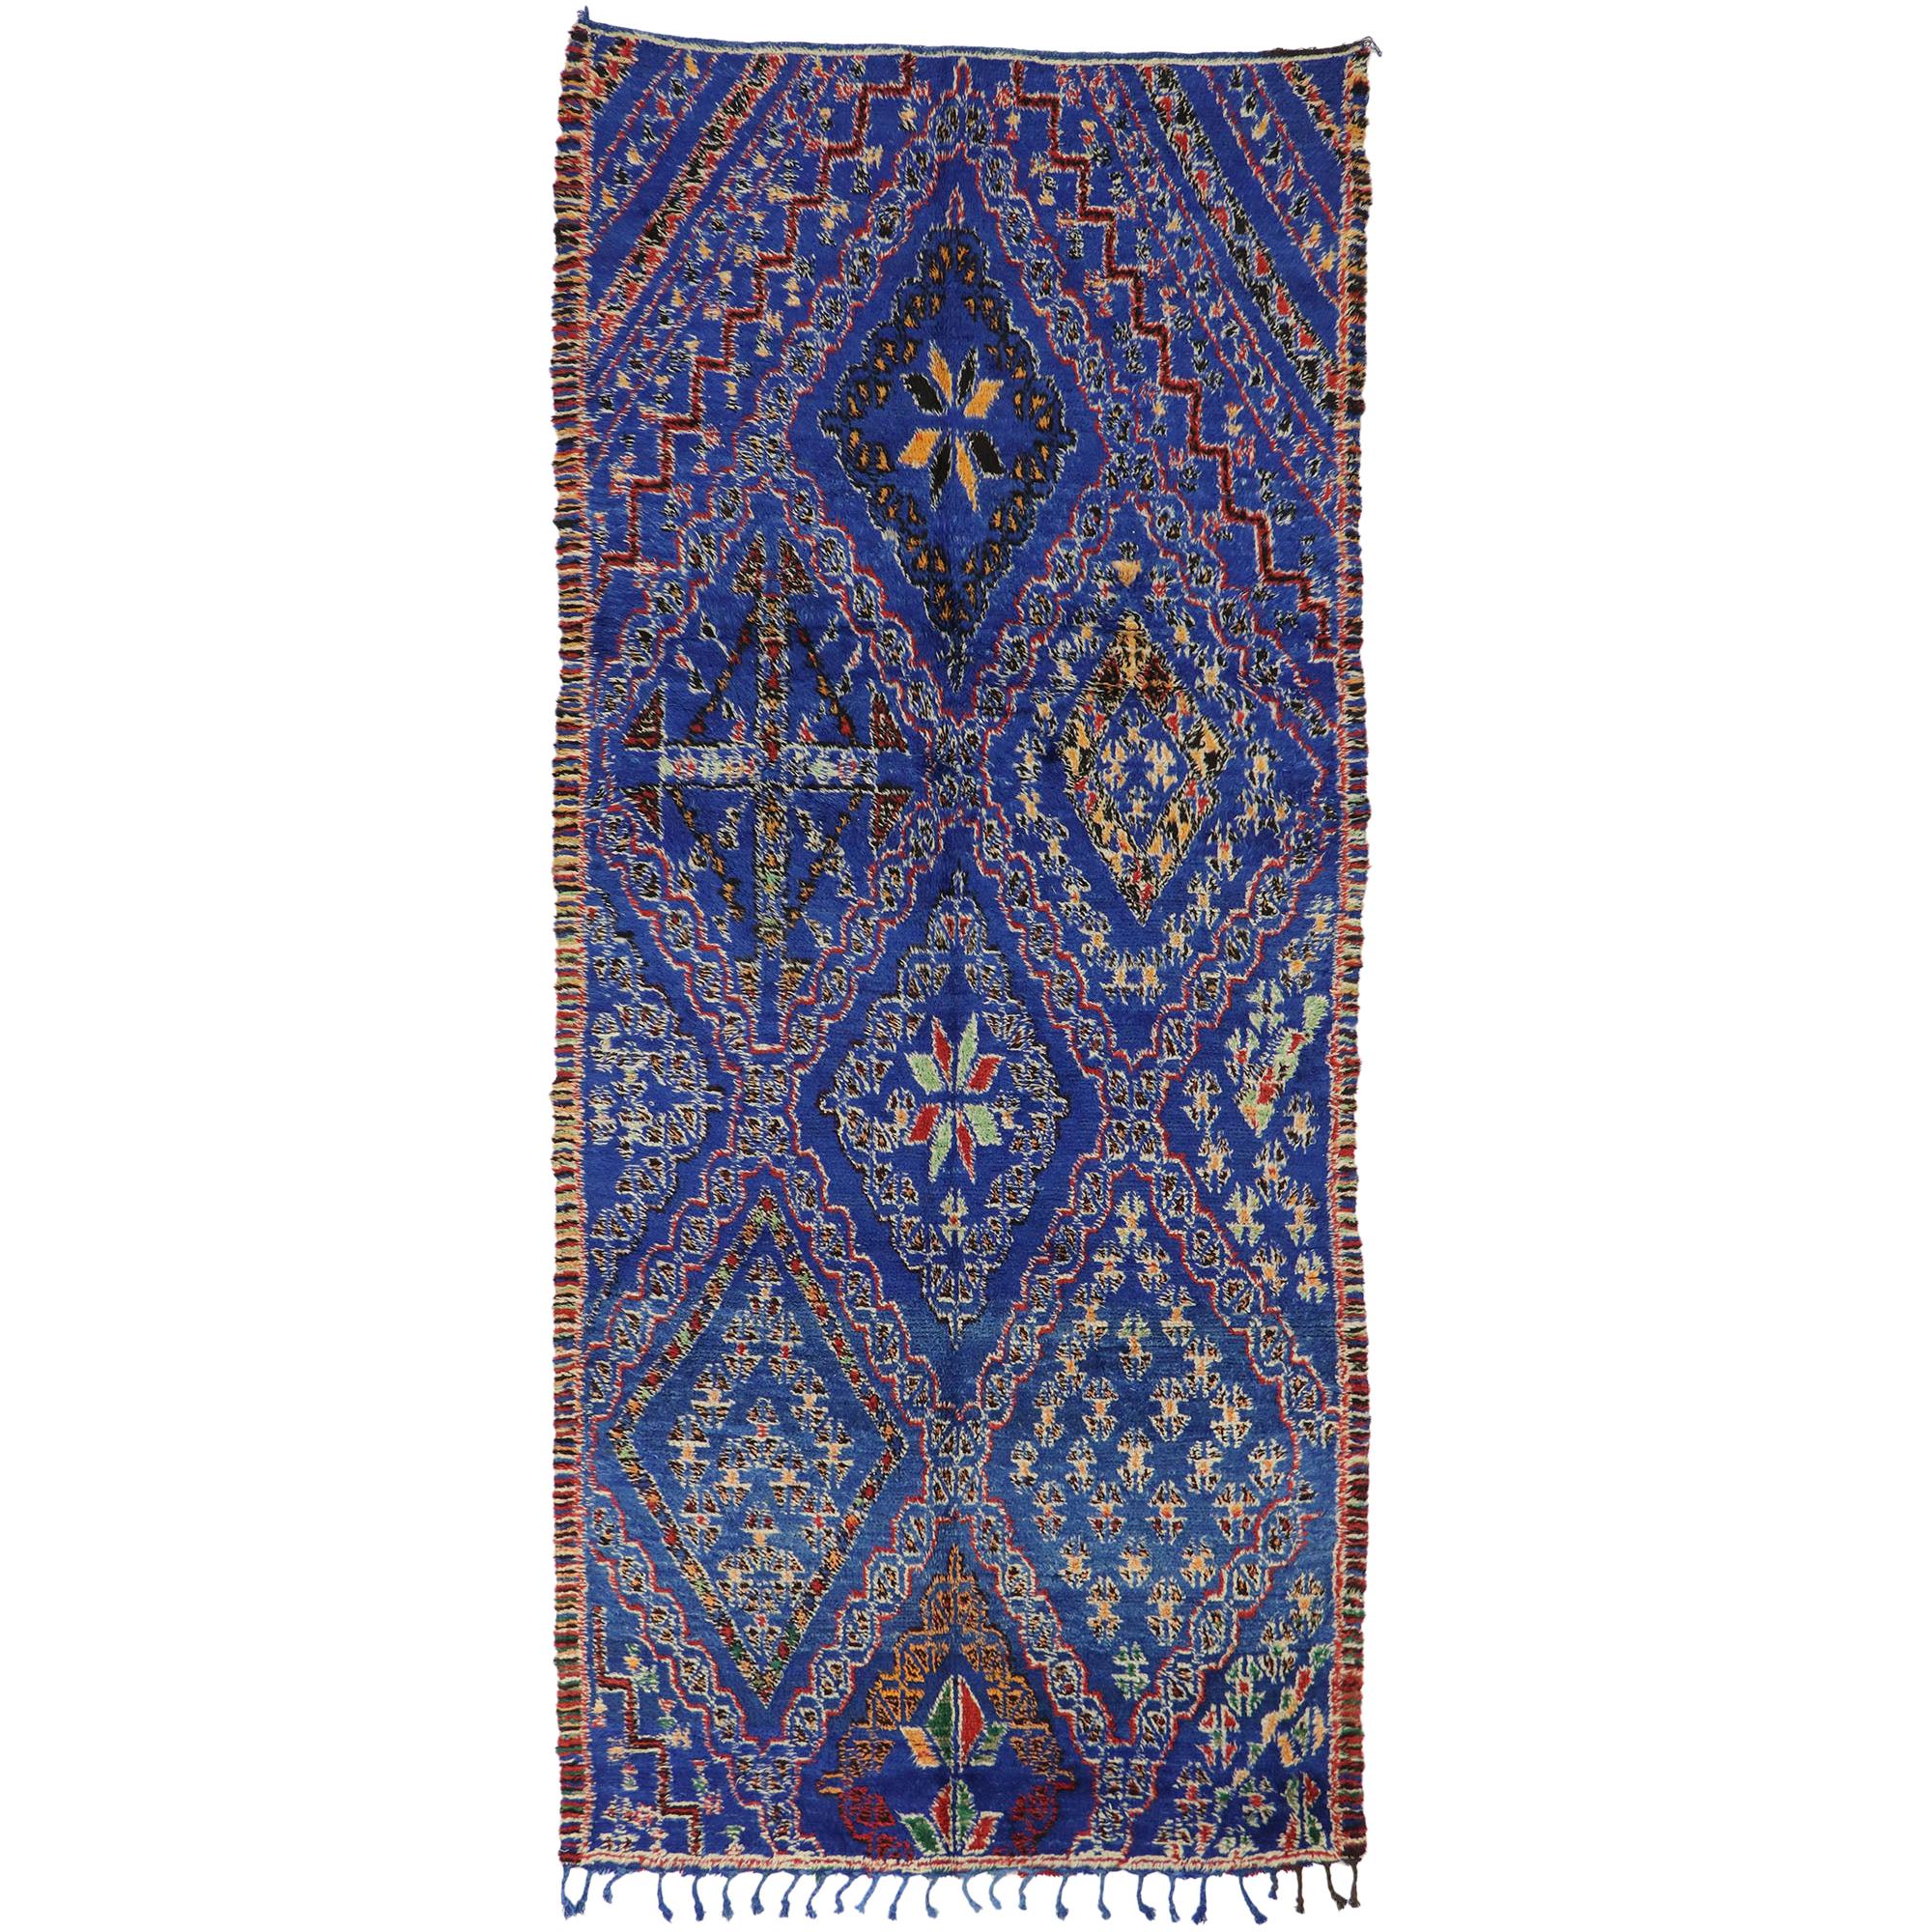 Vintage Blue Beni Mguild Moroccan Rug with Mid-Century Modern Tribal Style